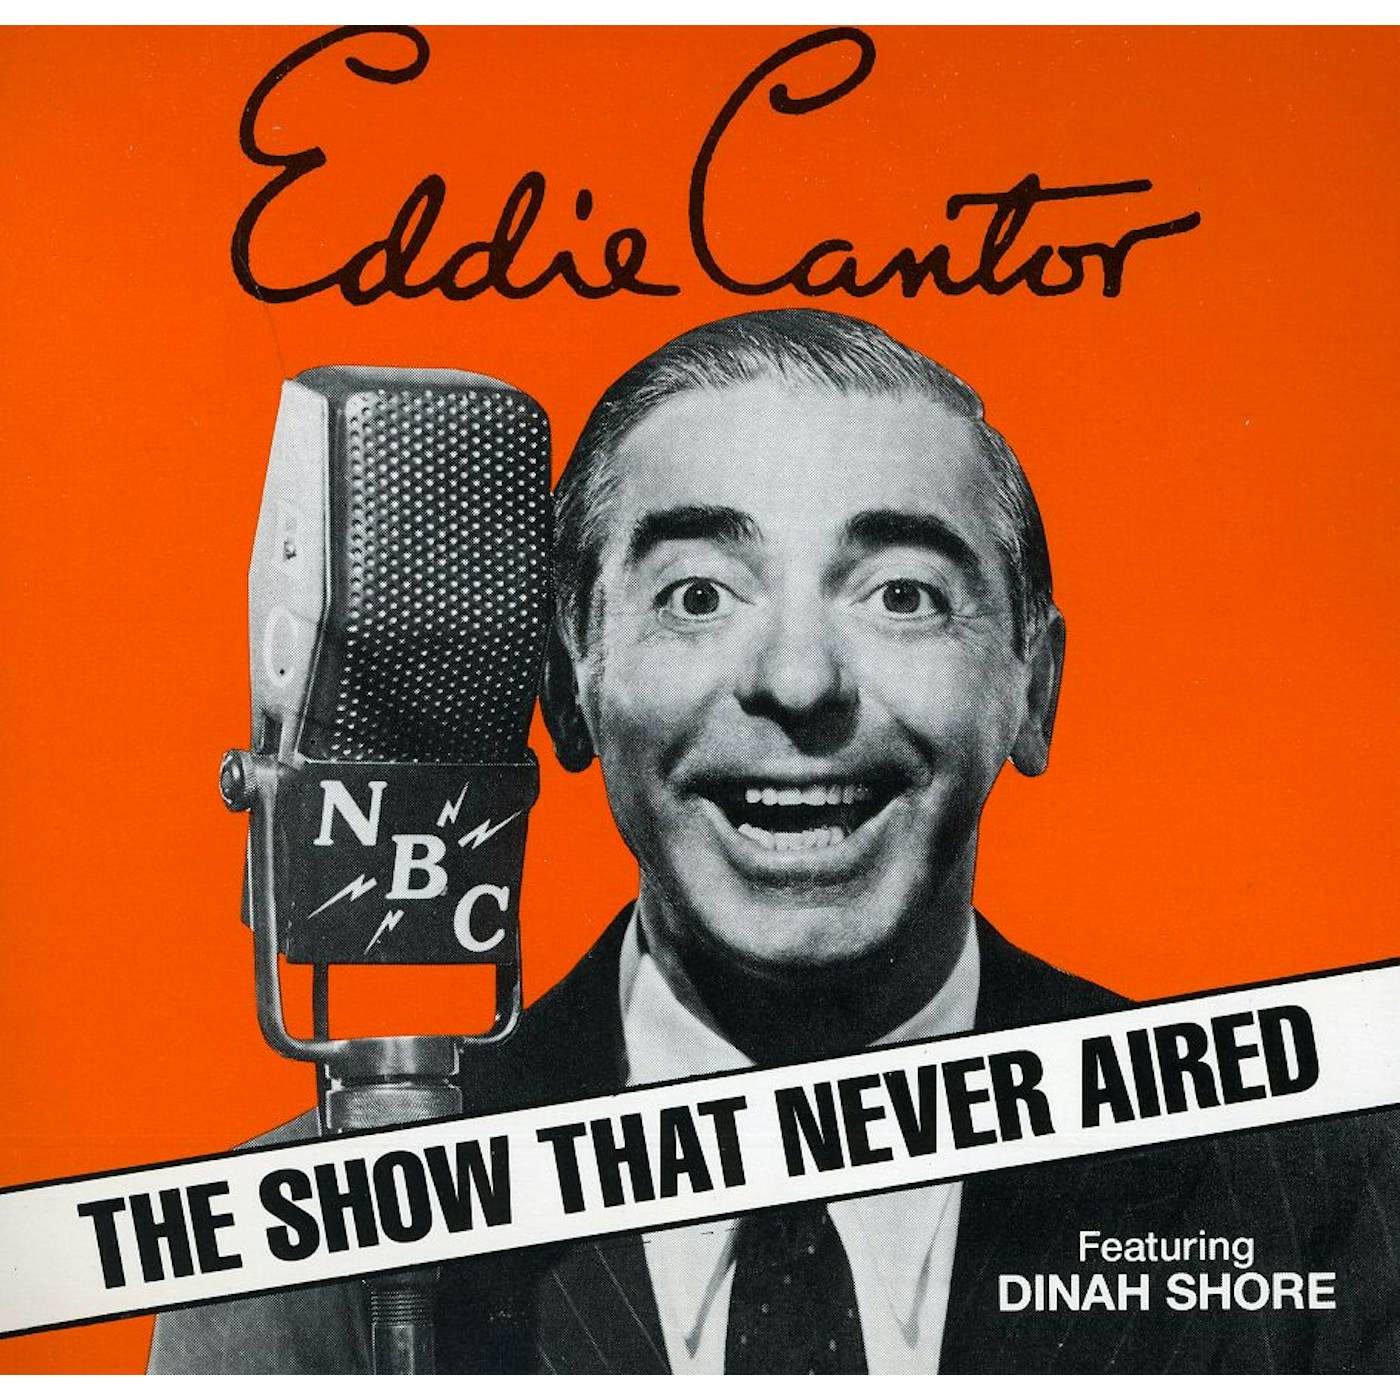 Eddie Cantor SHOW THAT NEVER AIRED CD